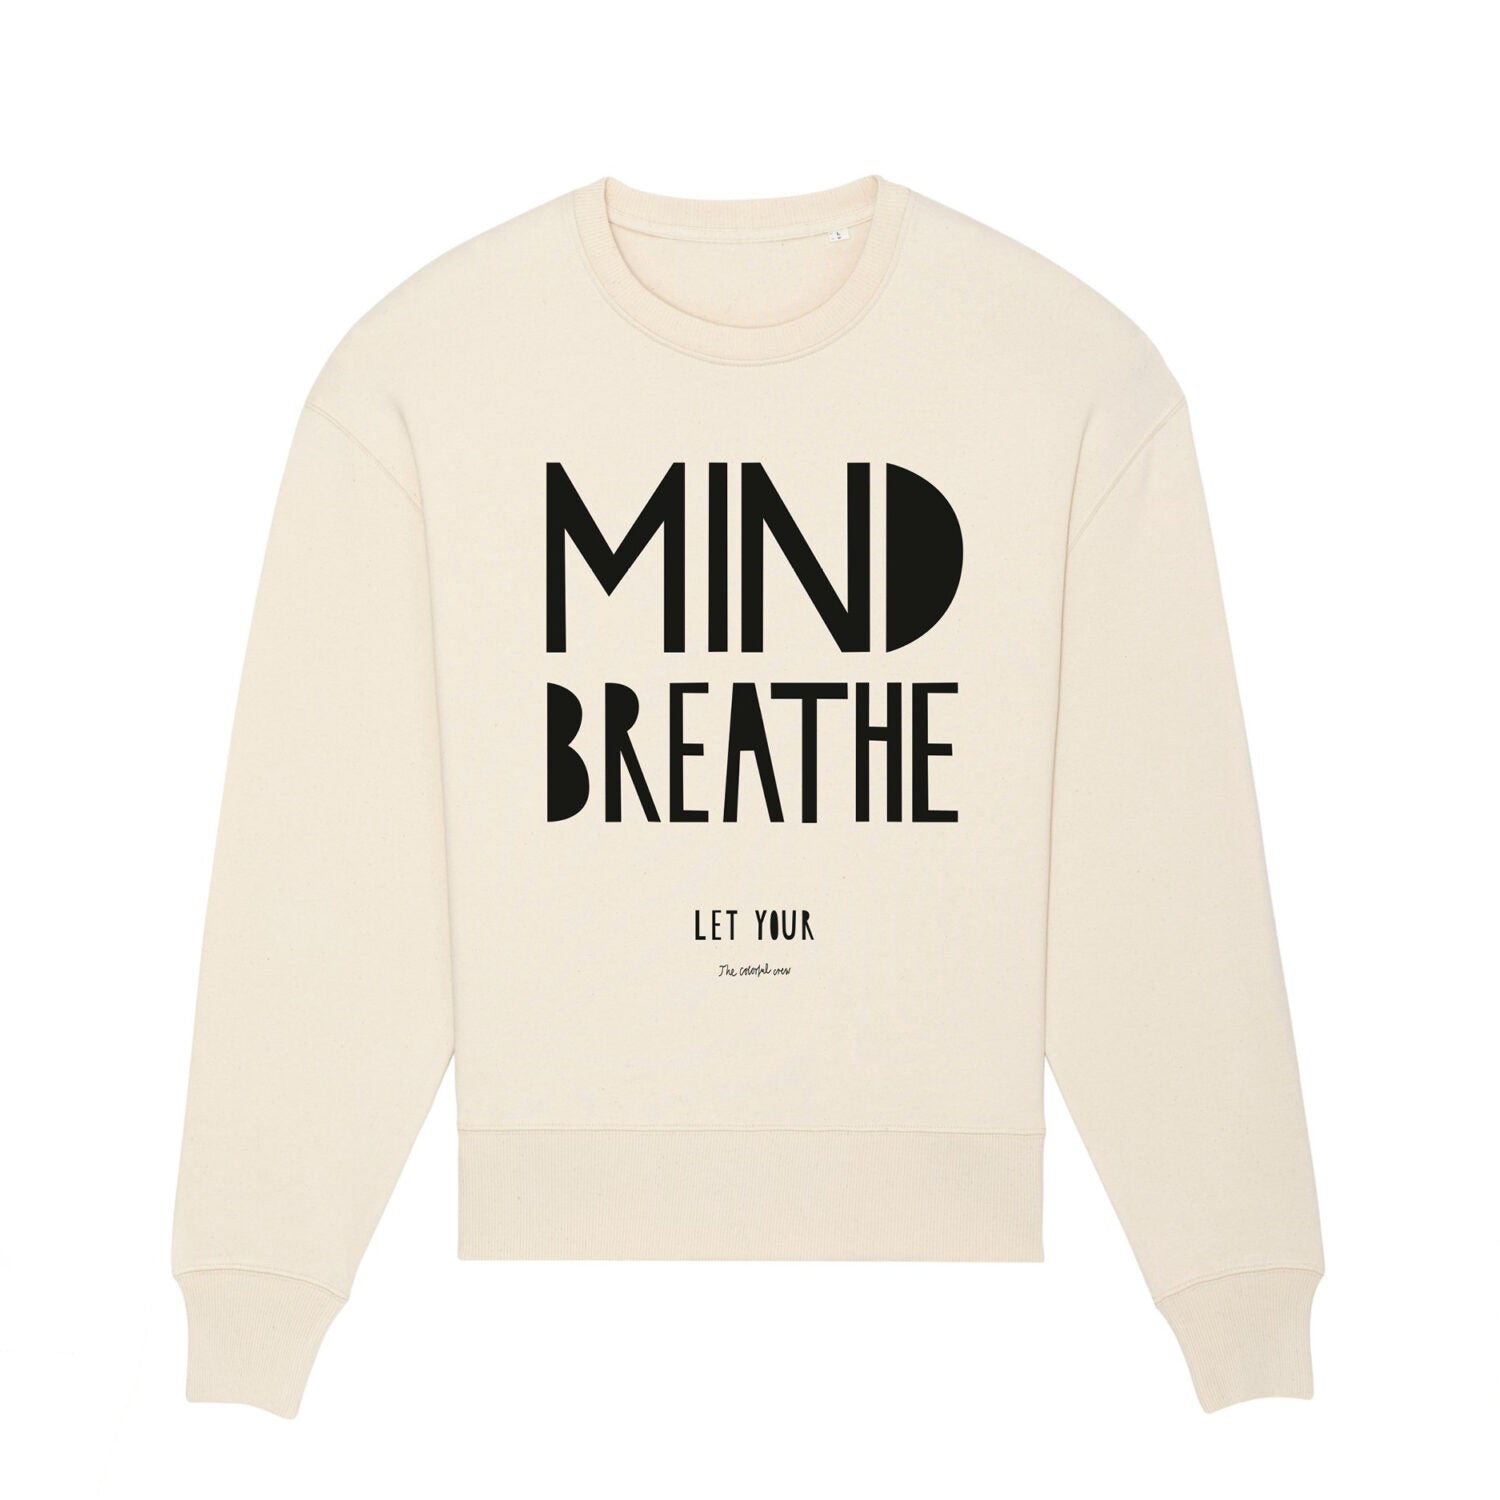 The colorful crew "Mind breathe" Sweater